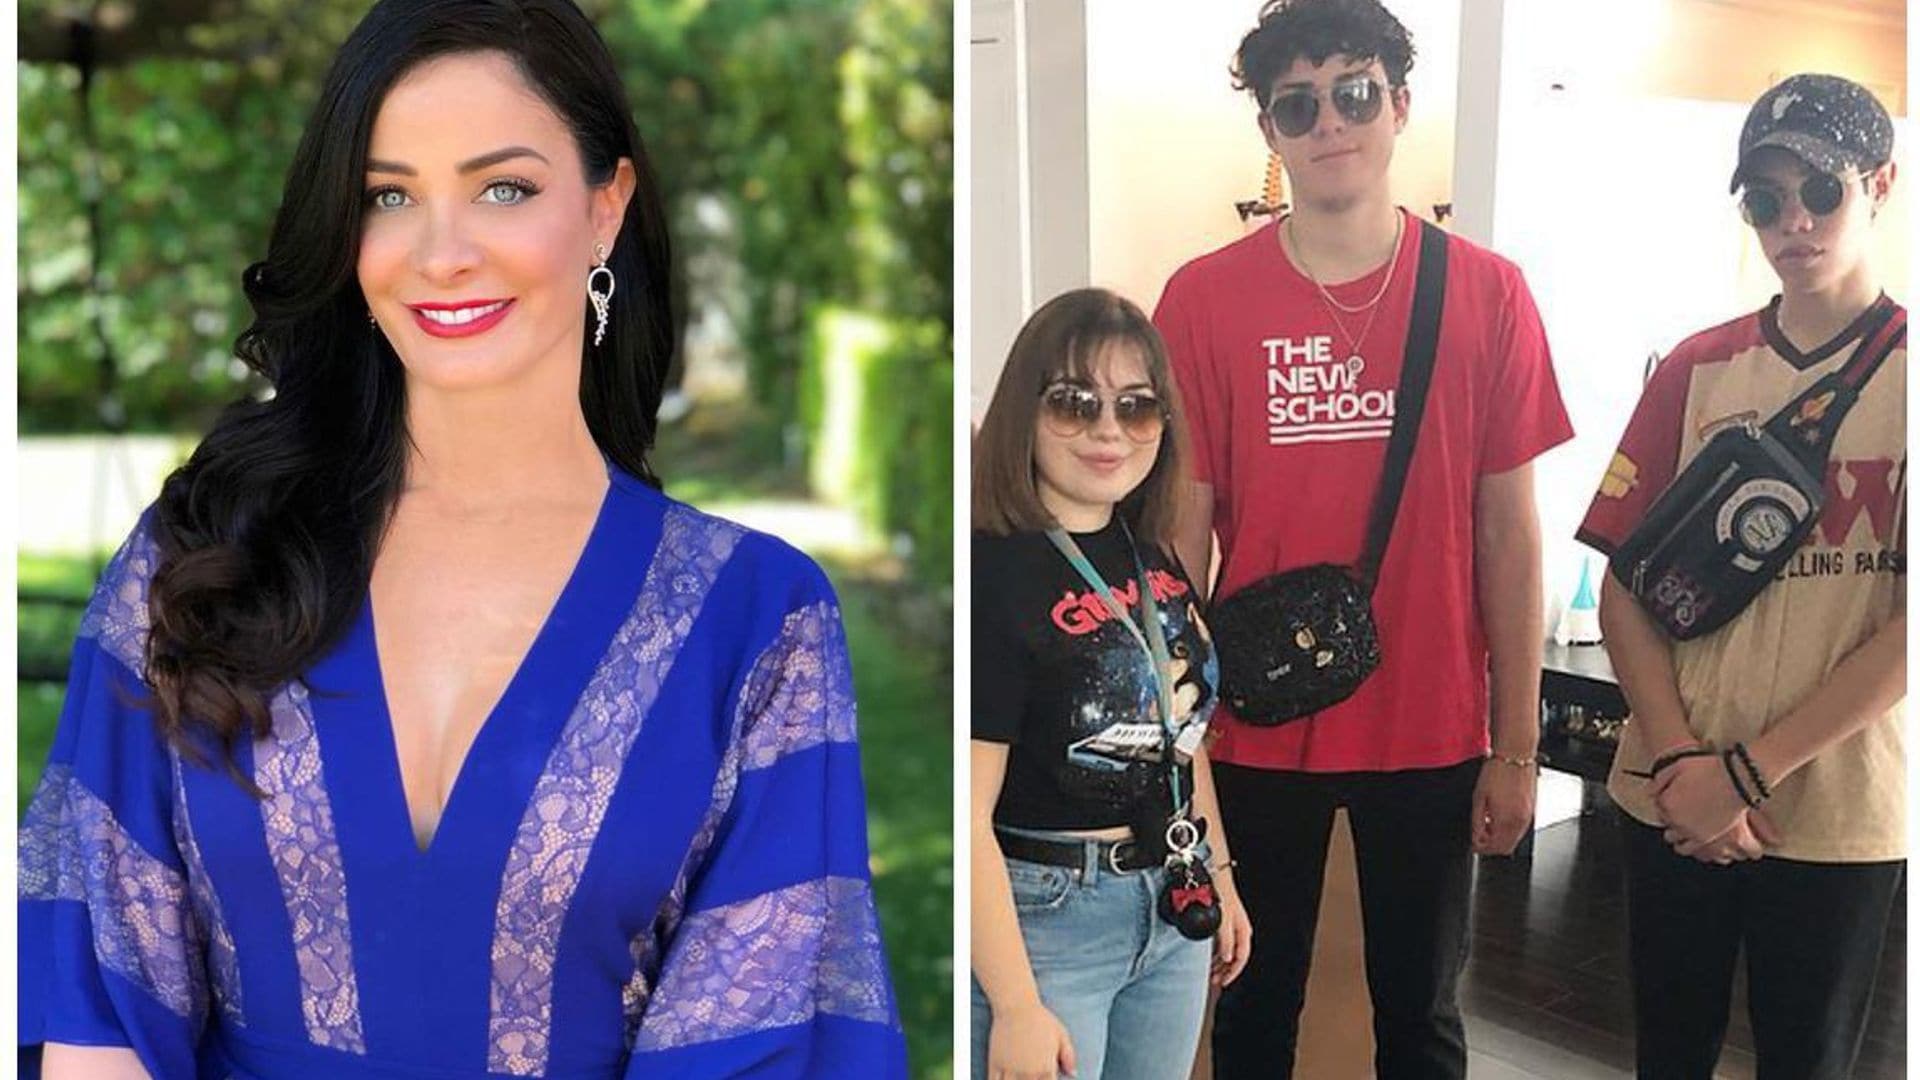 Marc Anthony’s son Cristian takes girlfriend on family date to Disney with mom Dayanara Torres